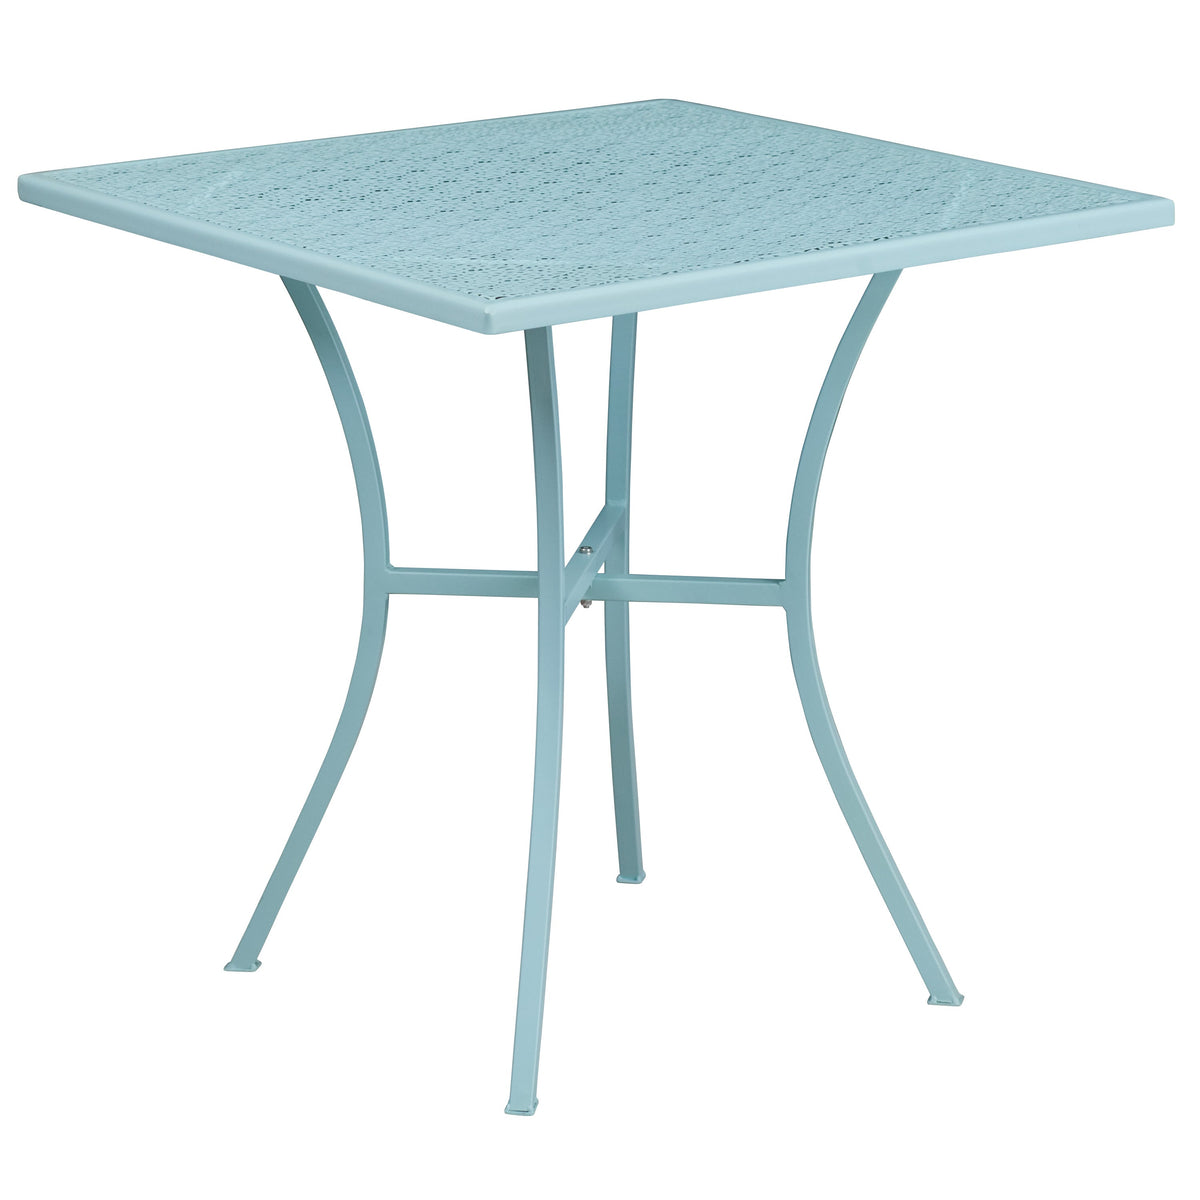 Sky Blue |#| 28inch Square Sky Blue Indoor-Outdoor Steel Patio Table Set - 4 Round Back Chairs